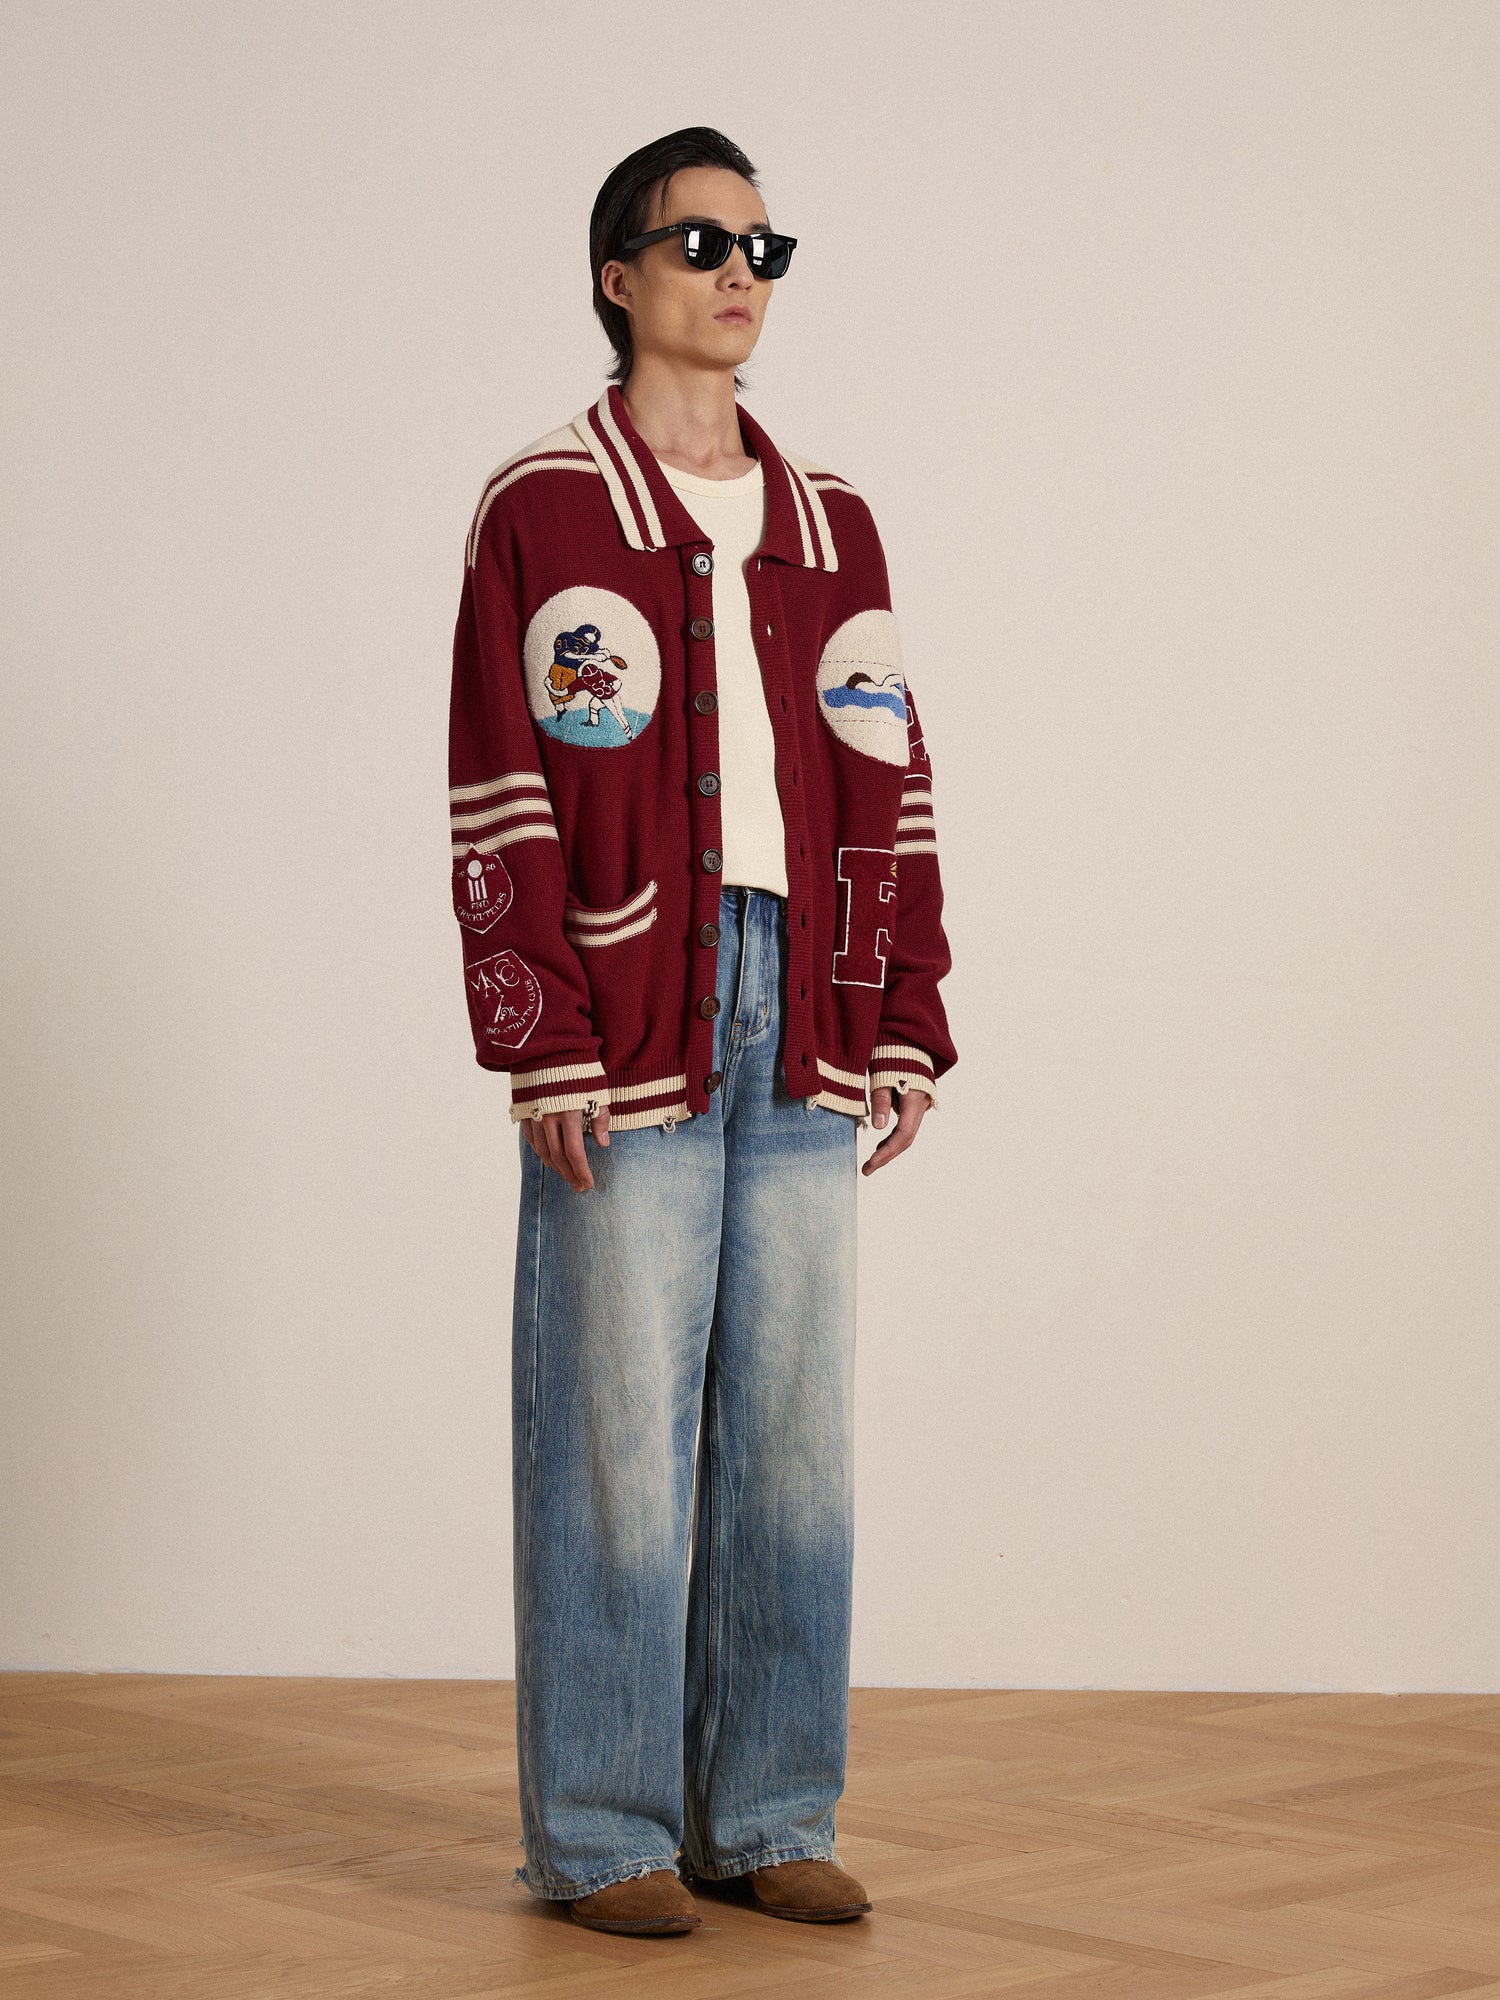 A woman in a red Found Varsity Patch Collared Cardigan and jeans is standing on a wooden floor.